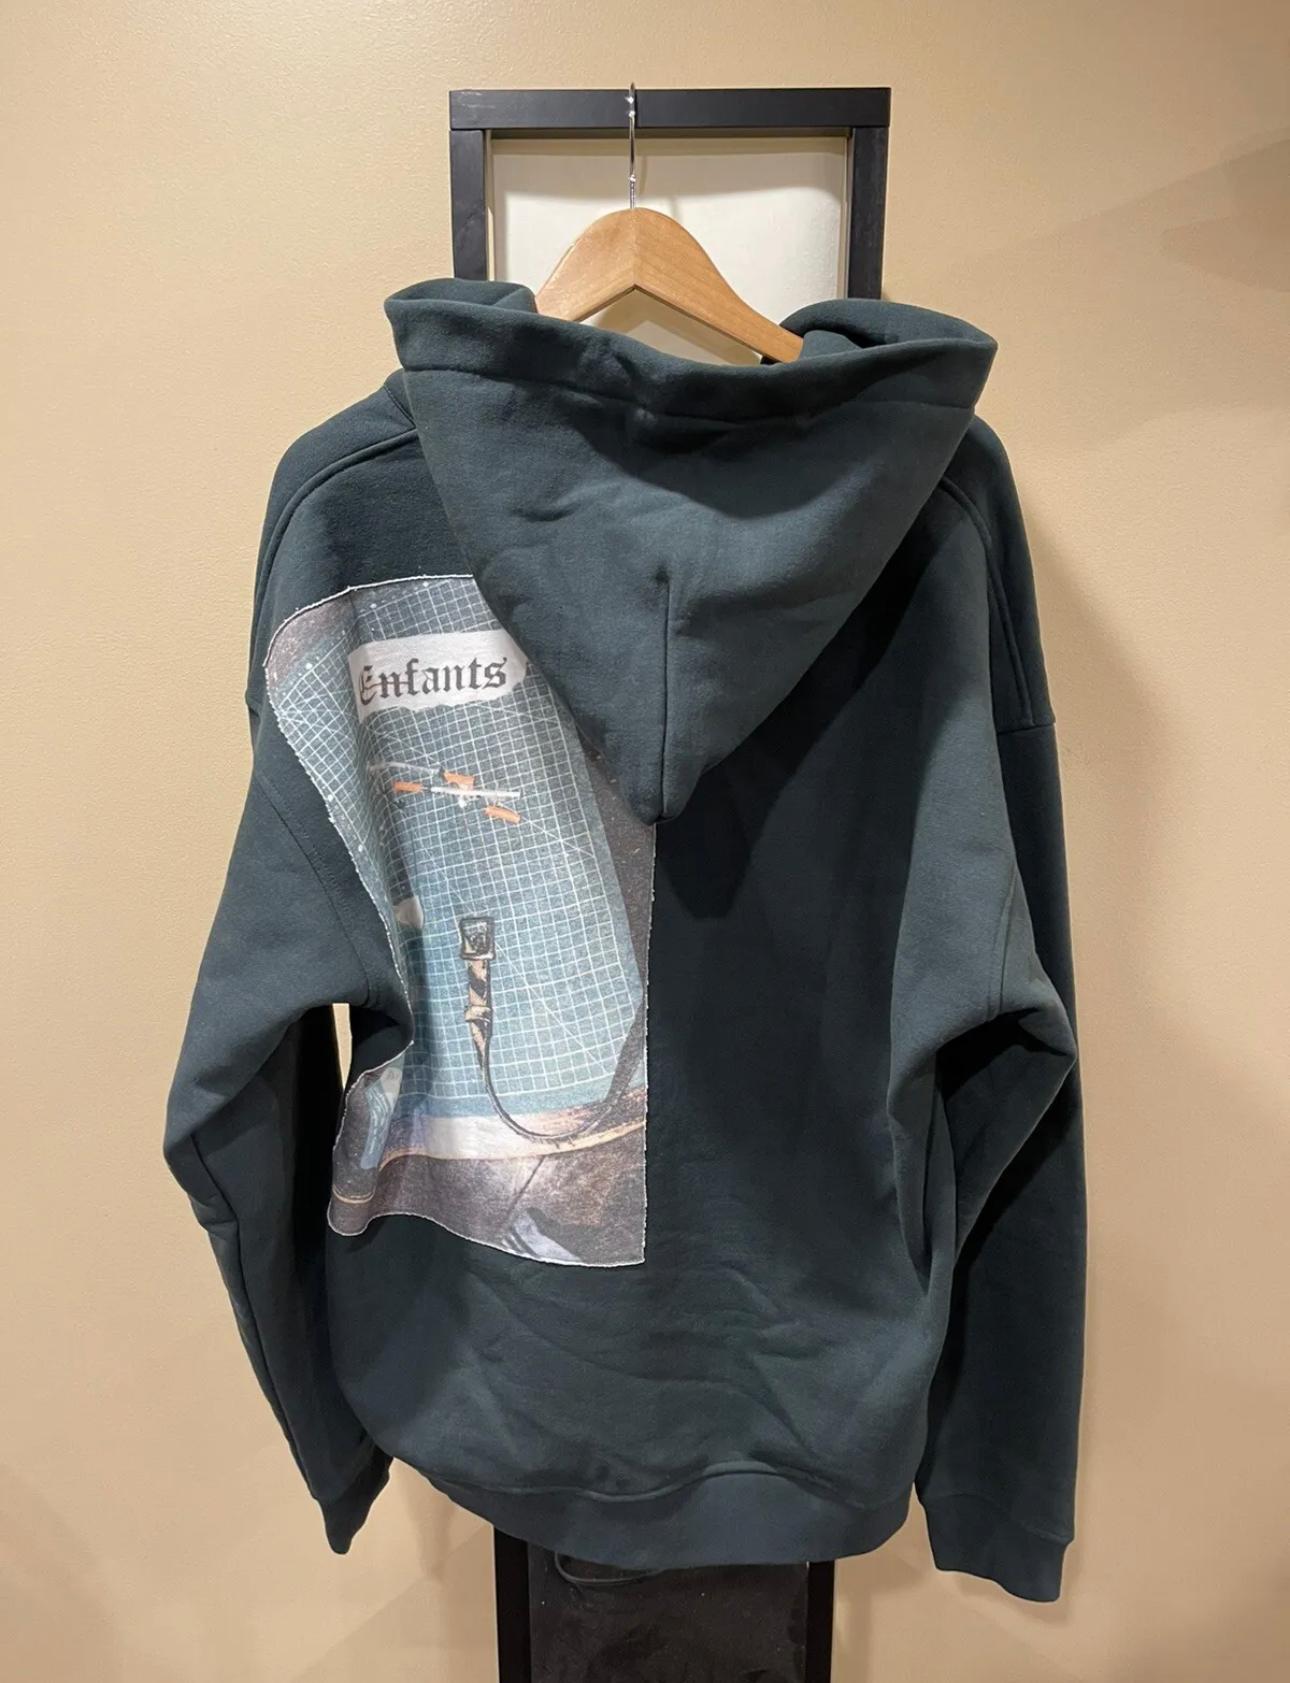 Enfants Riches Deprimes Green Assemblage Heroin Needle Patch Hoodie

Size XL
Excellent condition
Extremely rare ERD hoodie
Heroin needle patch

Measurements:
Chest: 26”
Length: 28”
Shoulders: 26”
Sleeve length: 26”

ALL SALES ARE FINAL.